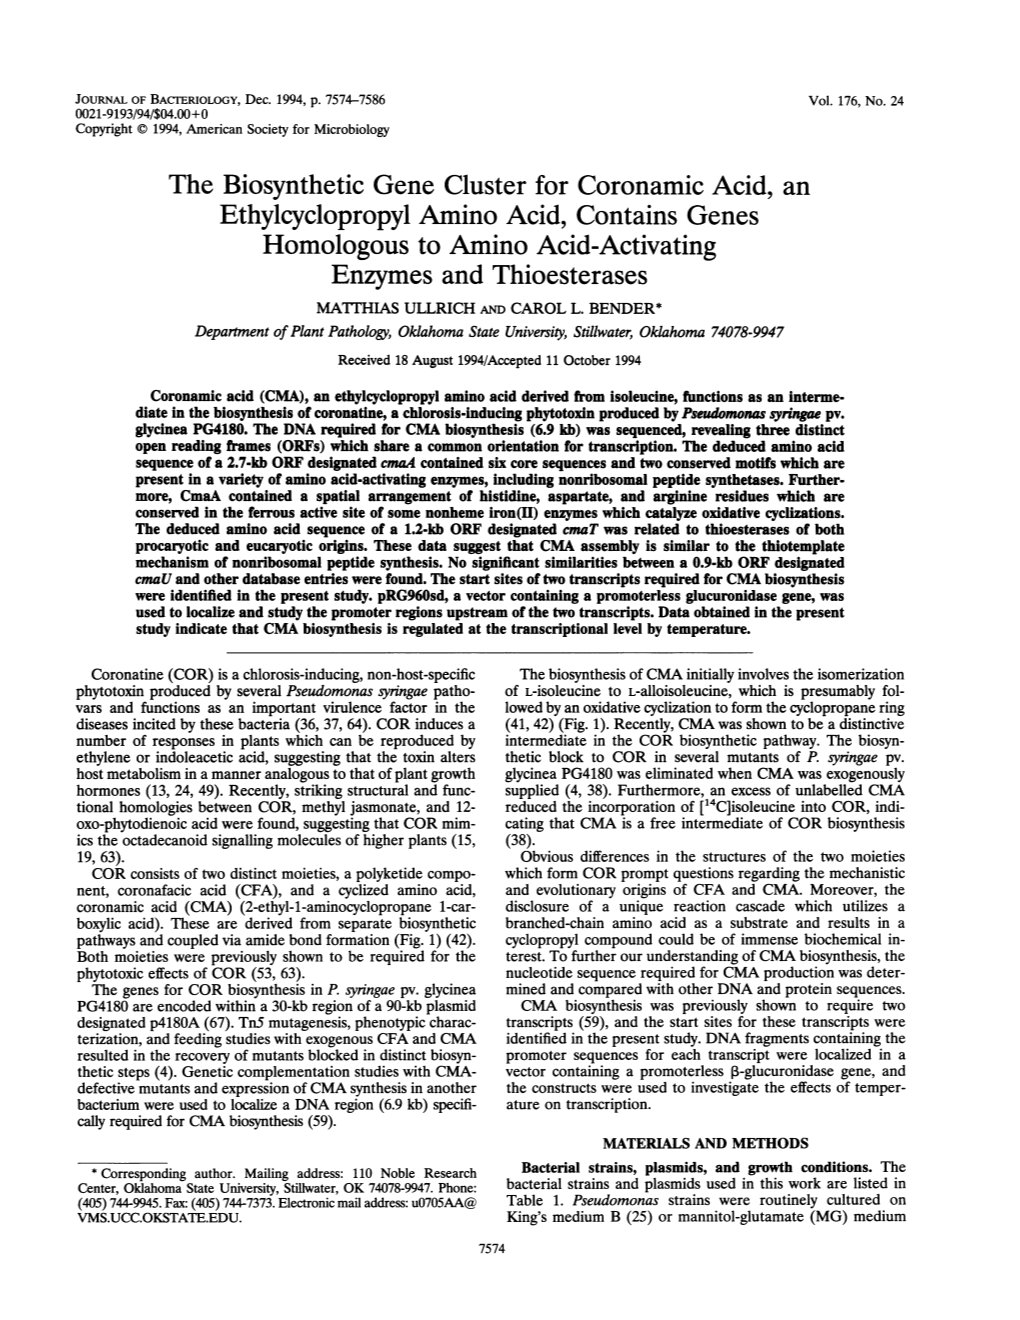 The Biosynthetic Gene Cluster for Coronamic Acid, An